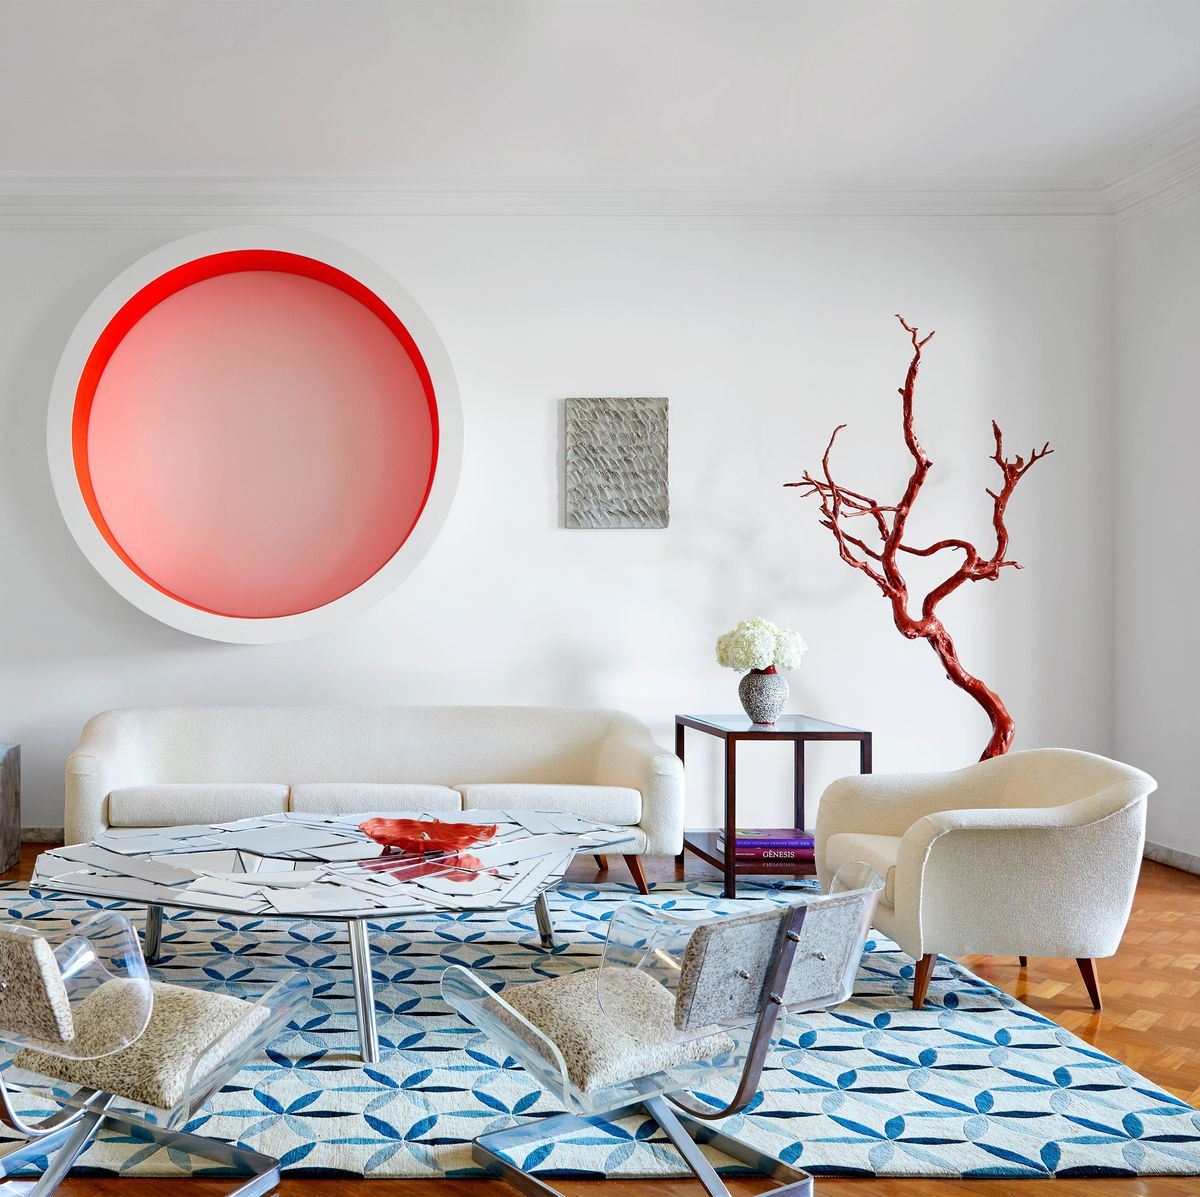 dining area with white round table at center with chairs sofa against wall and a large round pink and white piece of art on the wall